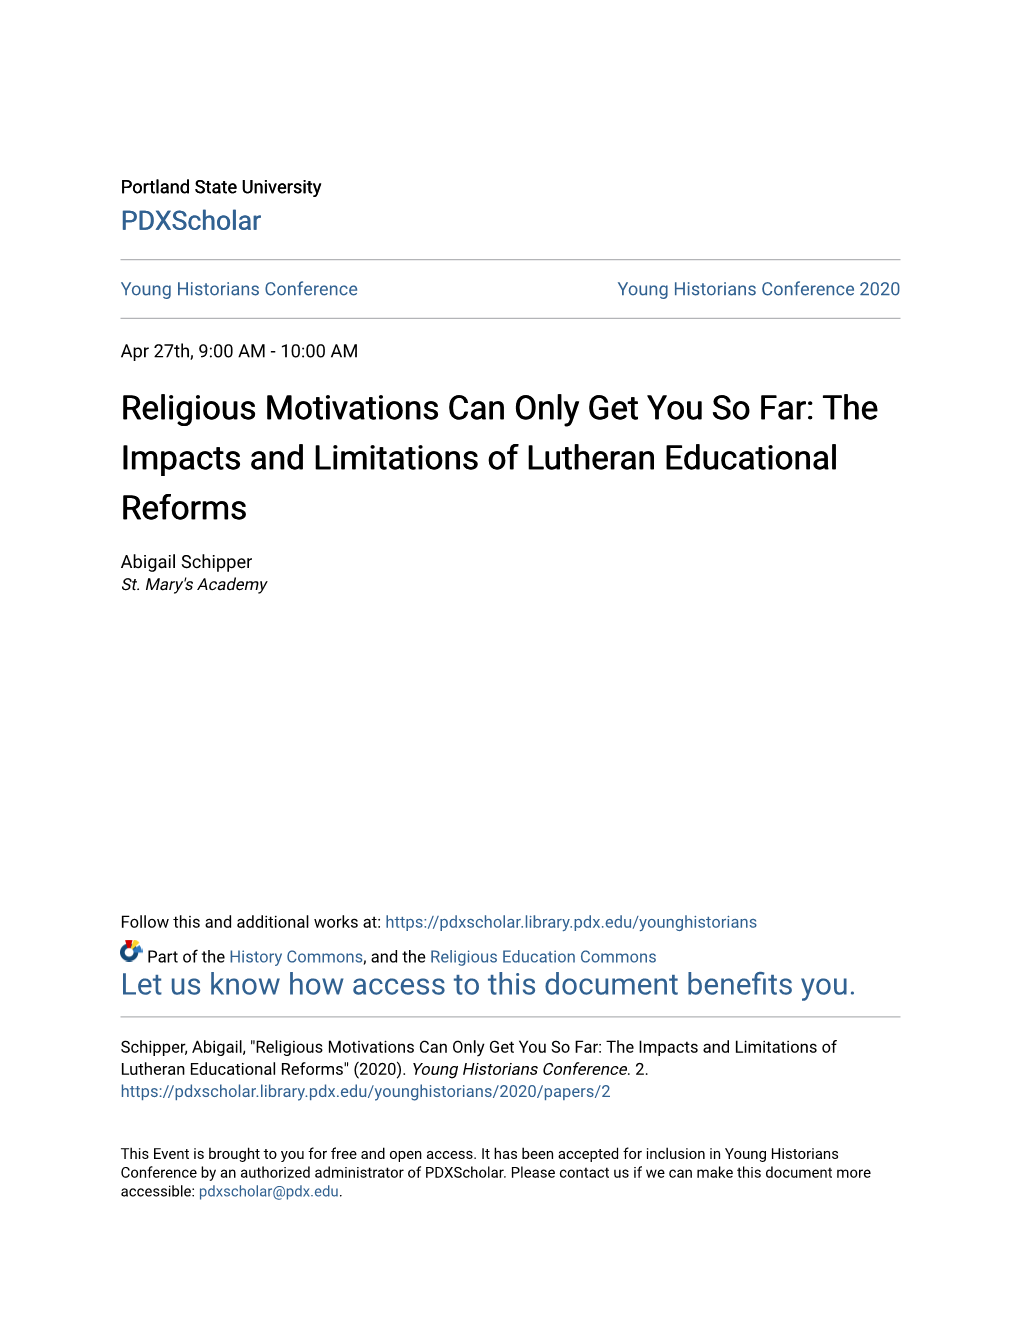 The Impacts and Limitations of Lutheran Educational Reforms